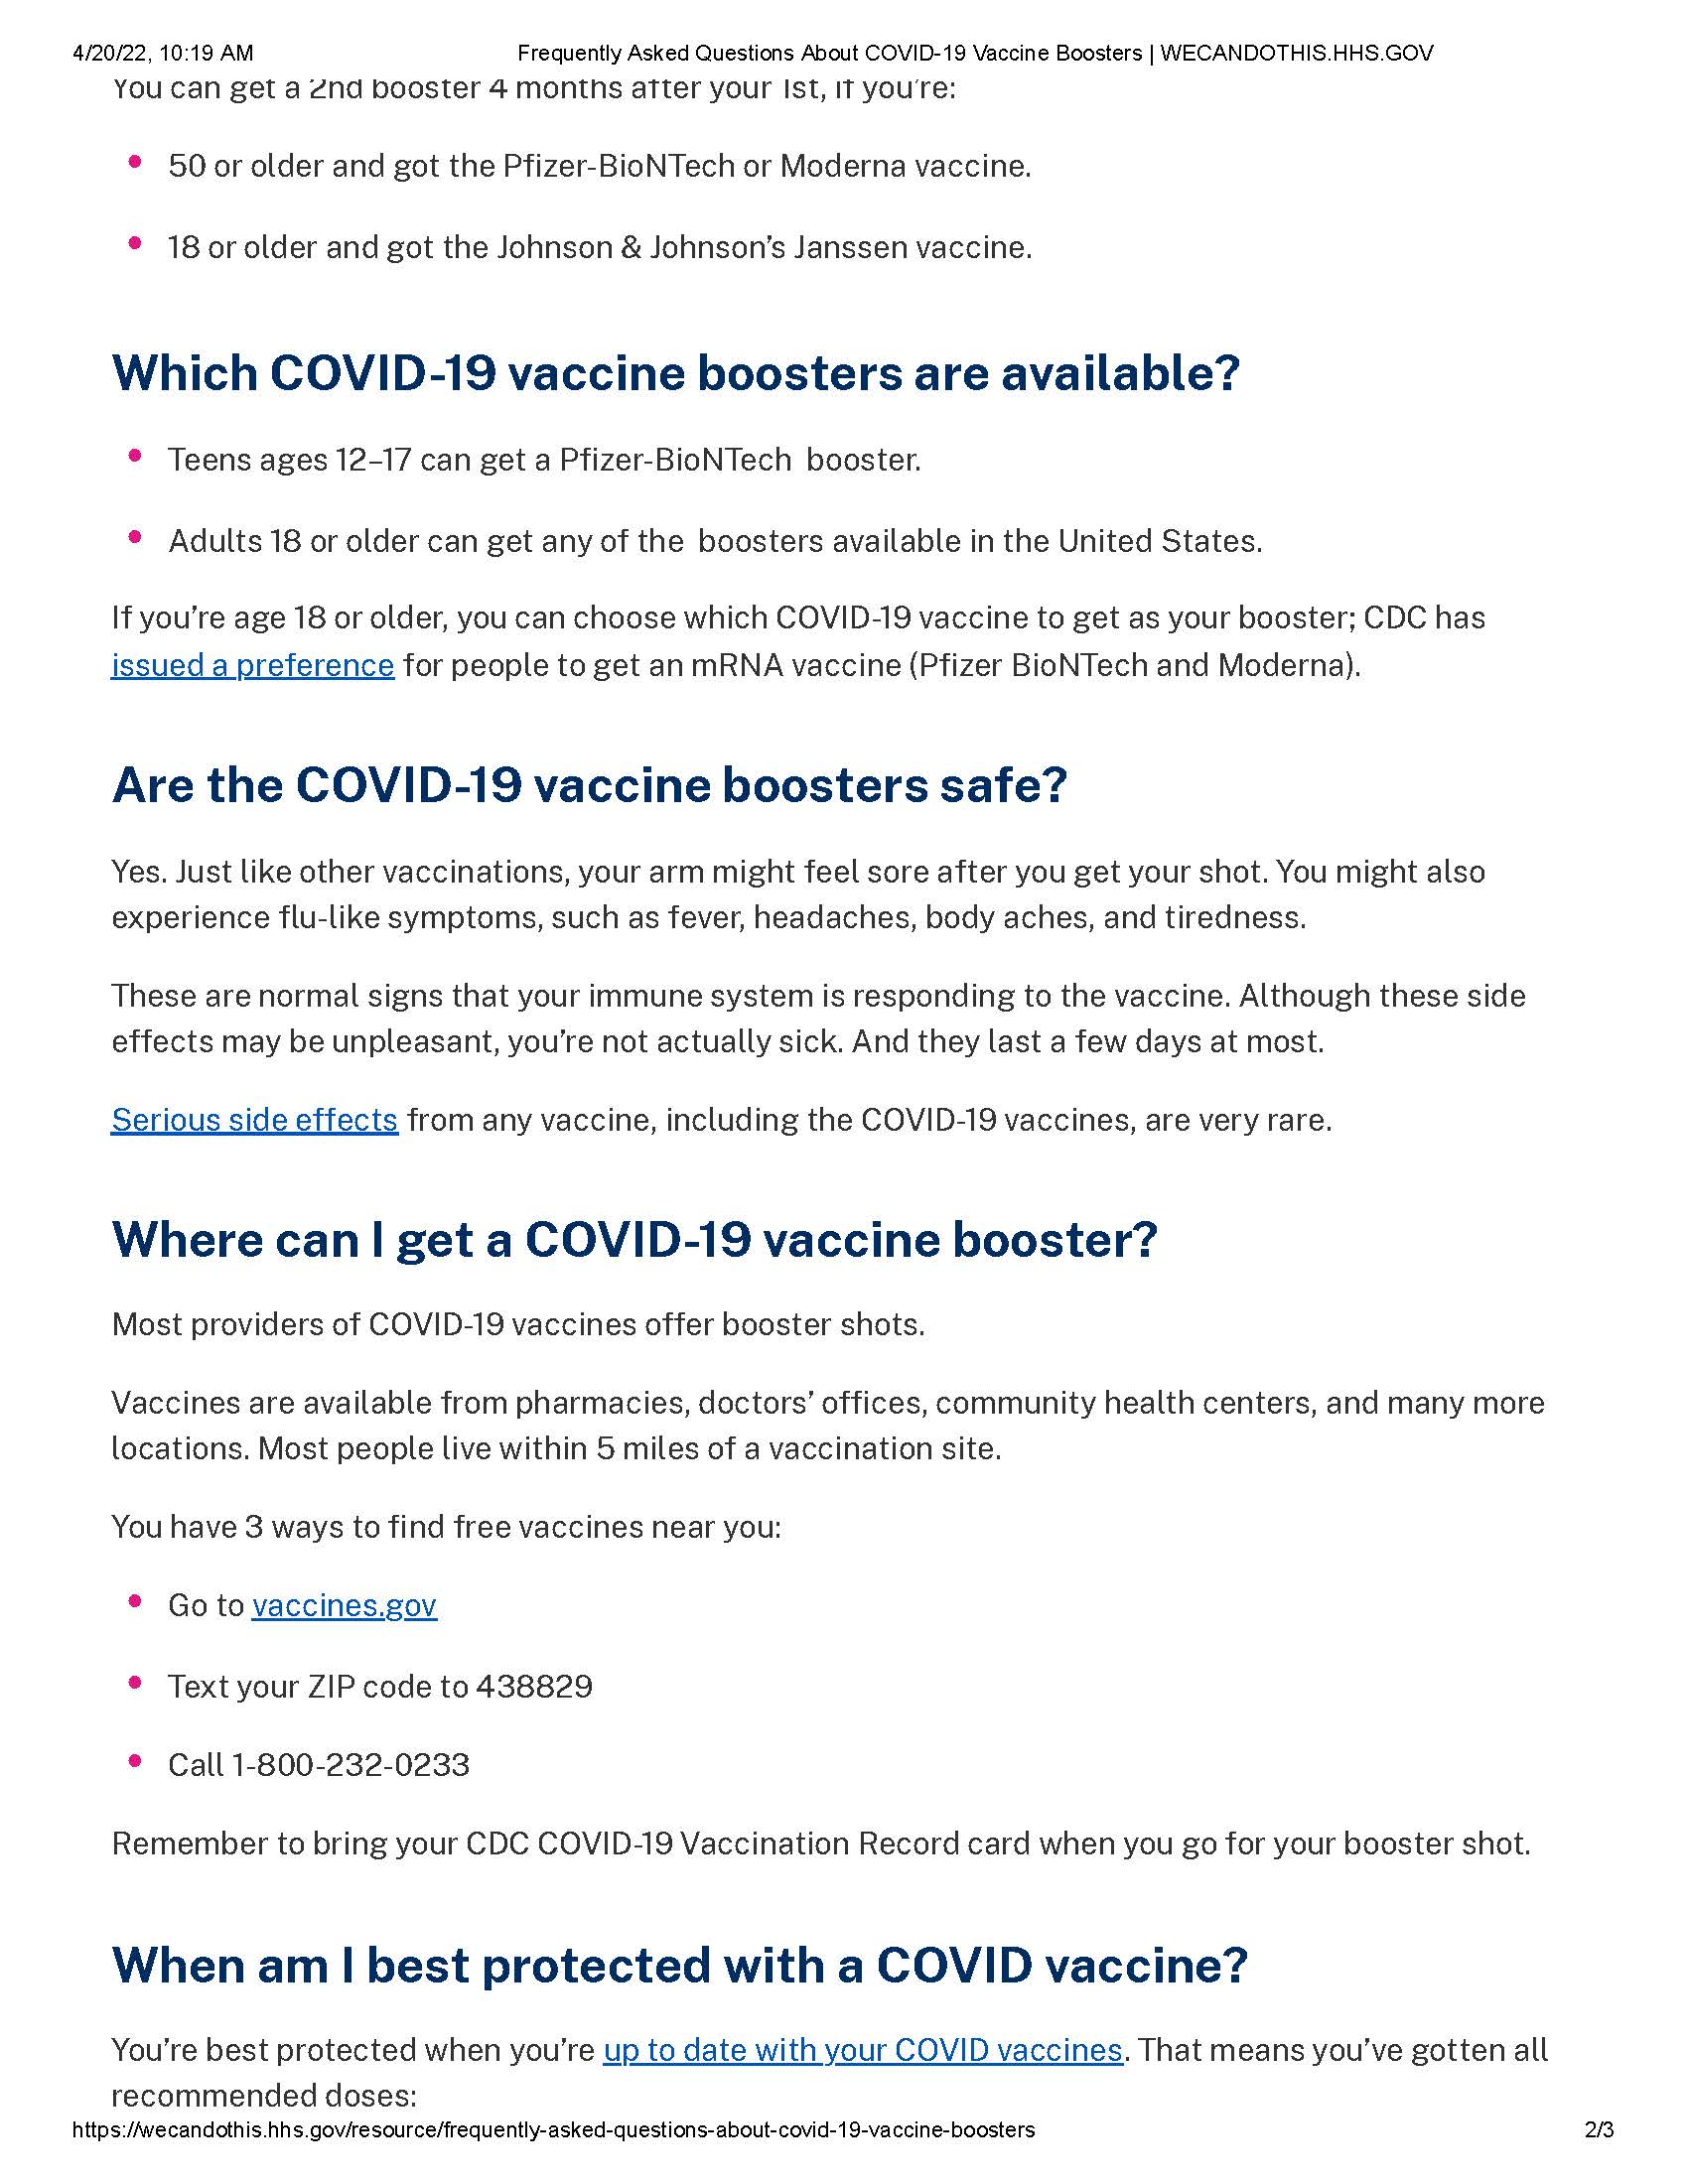 Frequently Asked Questions About COVID-19 Vaccine Boosters _ WECANDOTHIS.HHS.GOV_Page_2